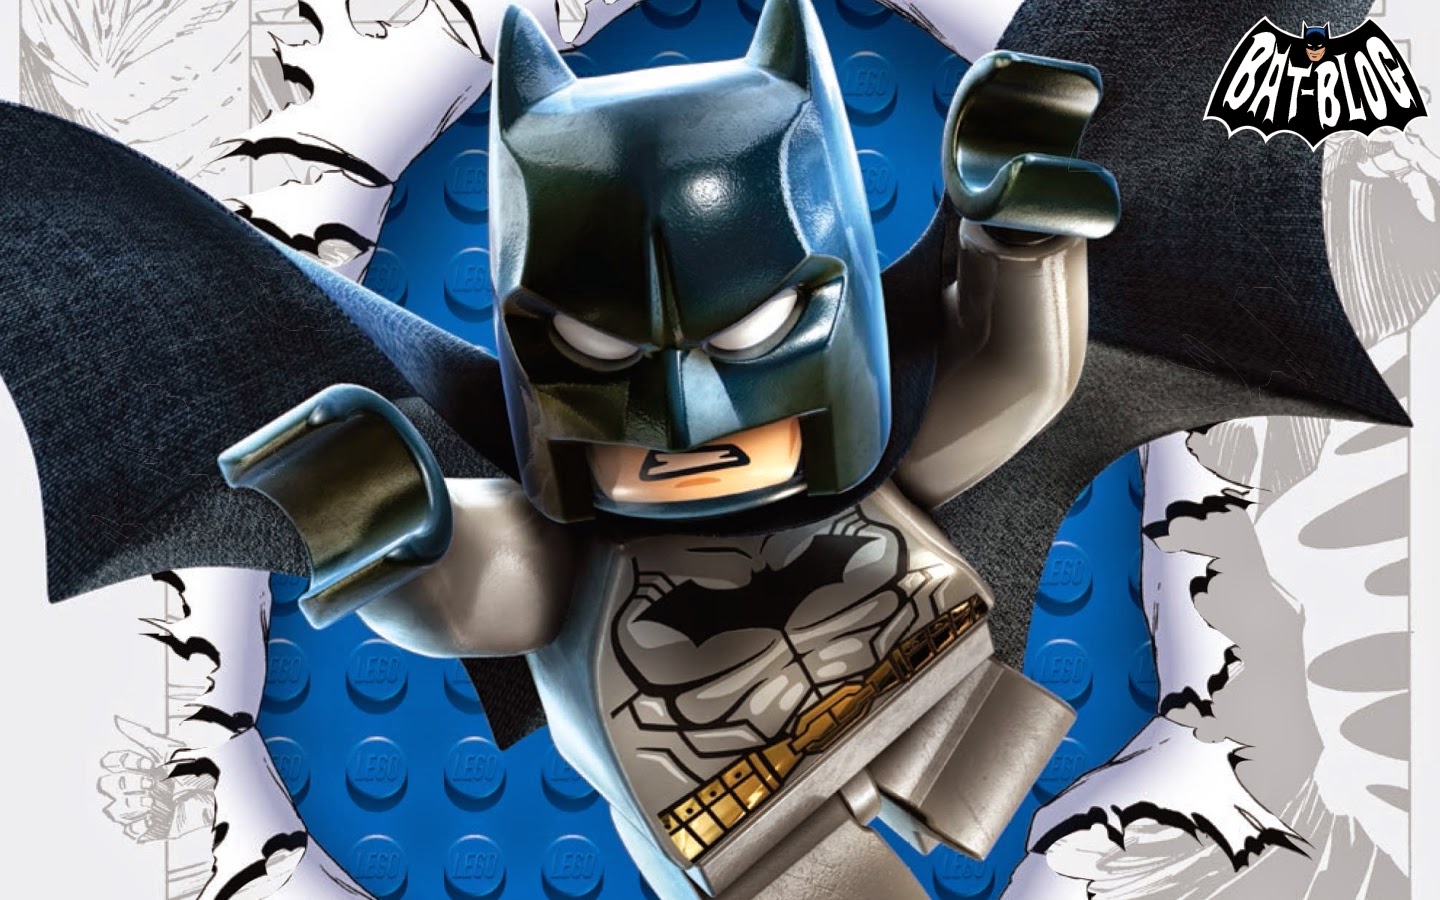  and COLLECTIBLES LEGO BATMAN 3 BEYOND GOTHAM   Video Game WALLPAPERS